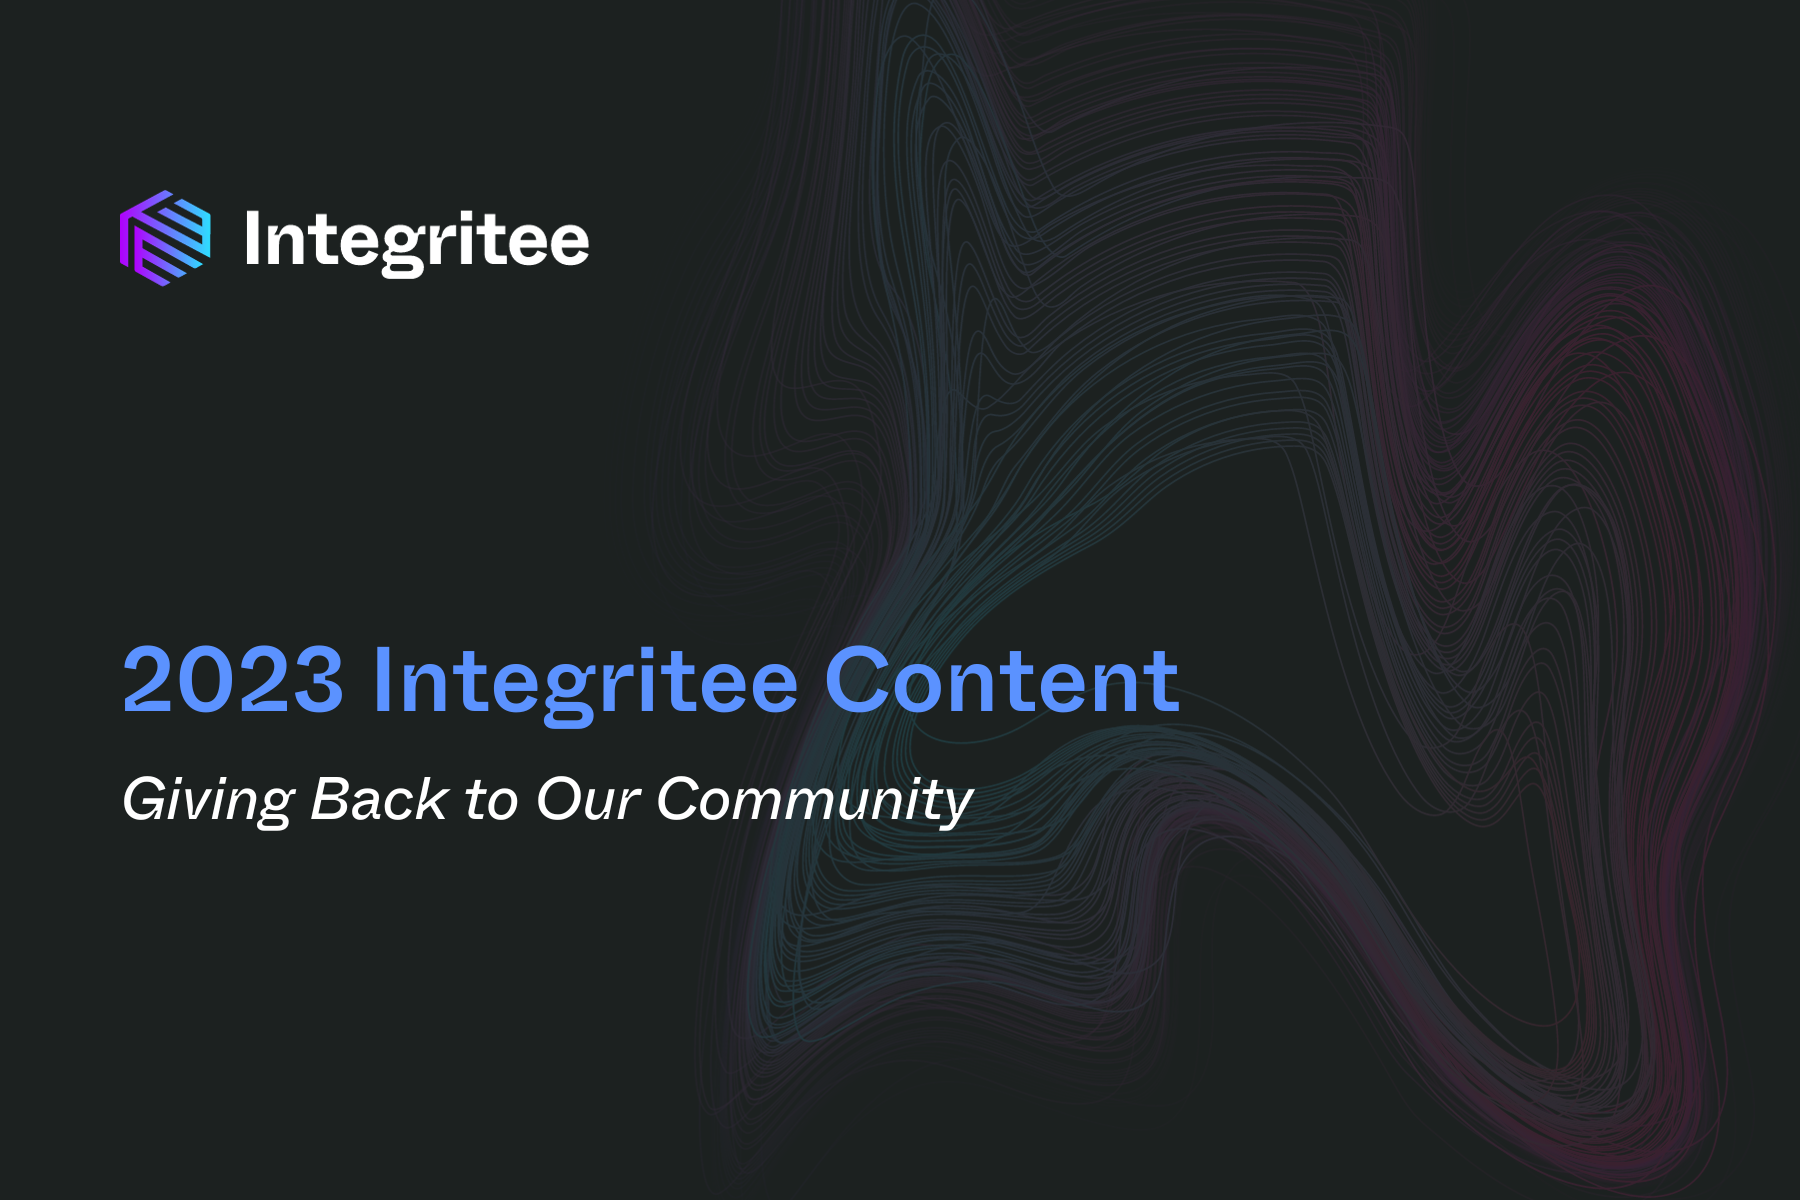 2023 Integritee Content: Giving Back to Our Community